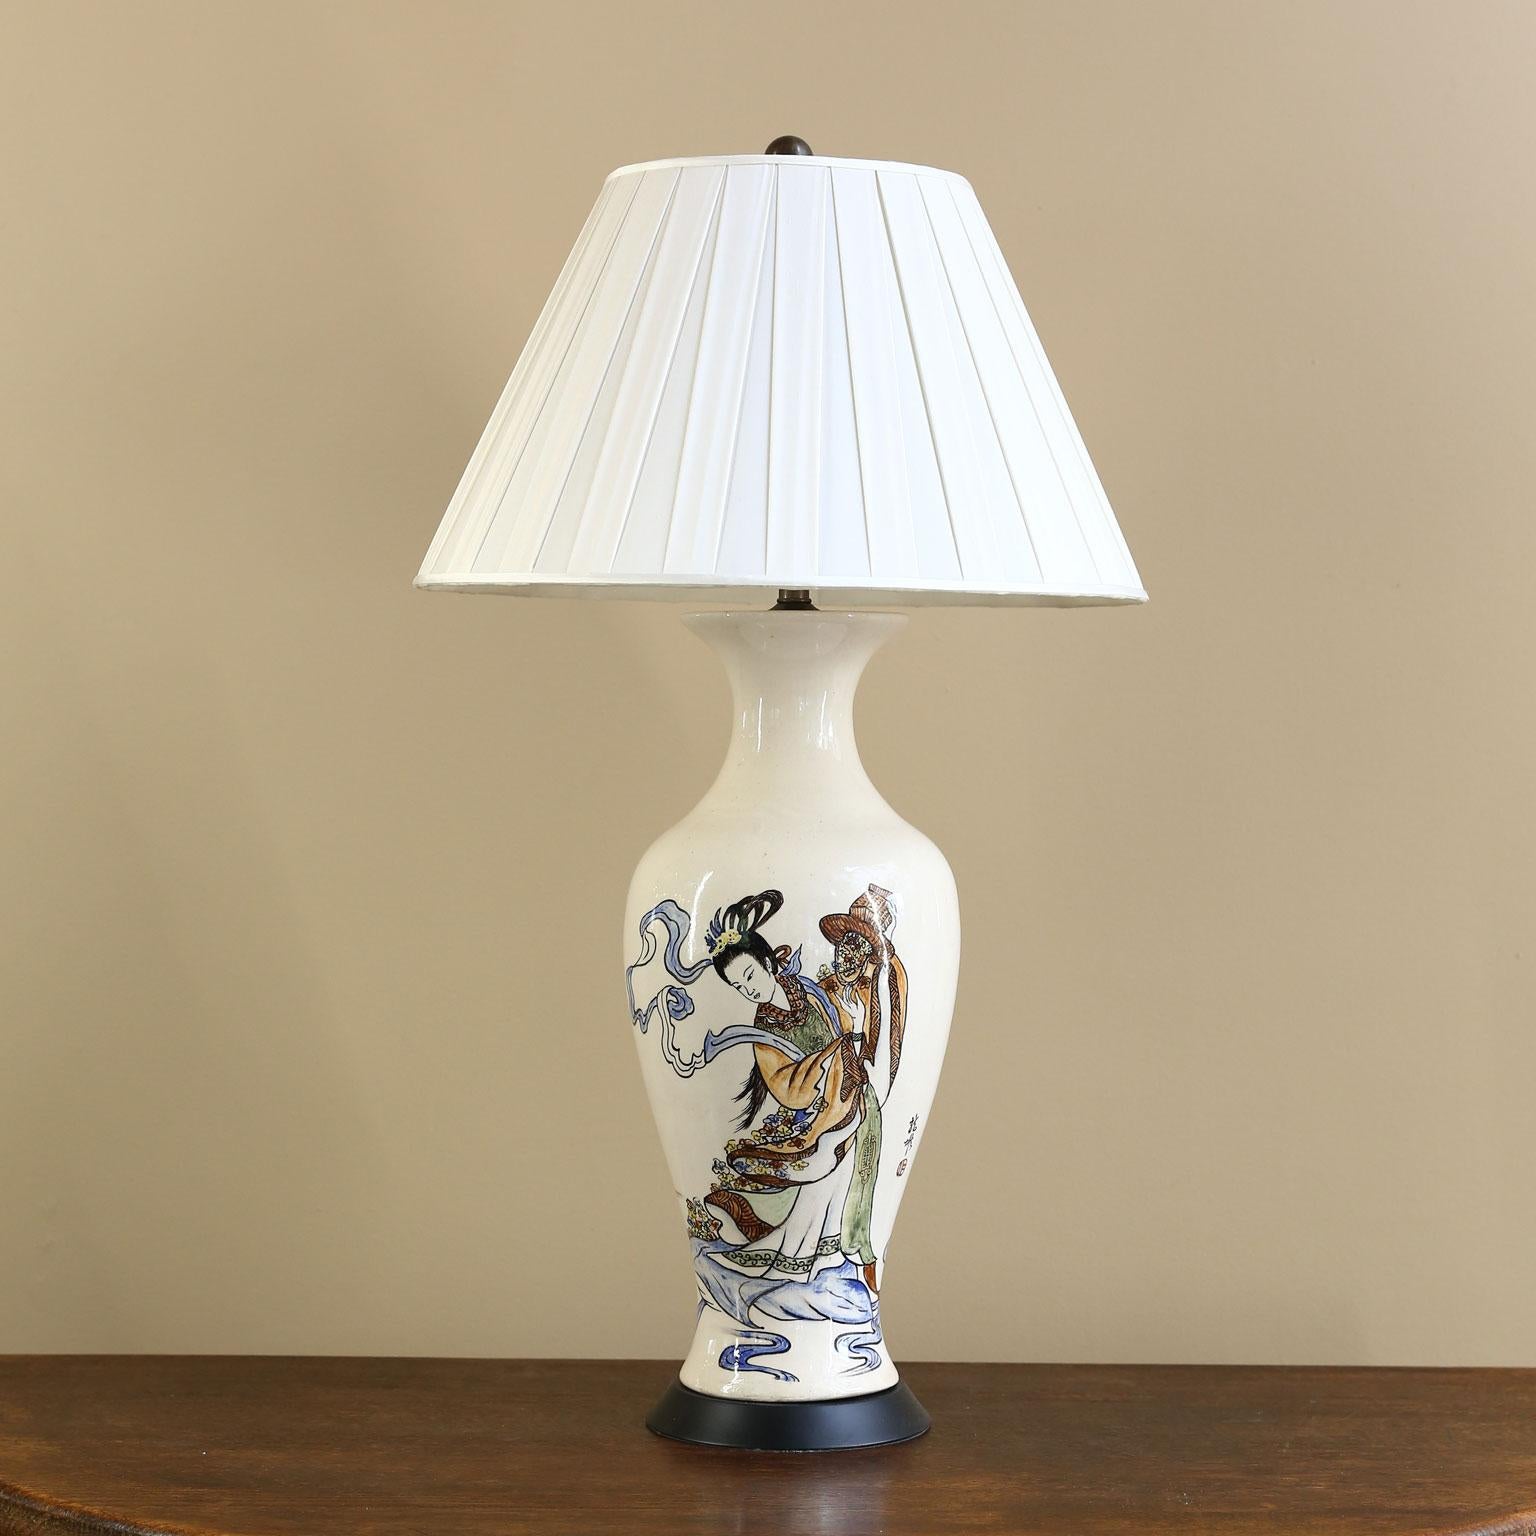 This charming lamp has art or the front of it and characters on the back of it. It has been newly wired for the US using all UL approved parts. We have photographed the lamp with a shade which is not included. (They are too difficult to ship.) The